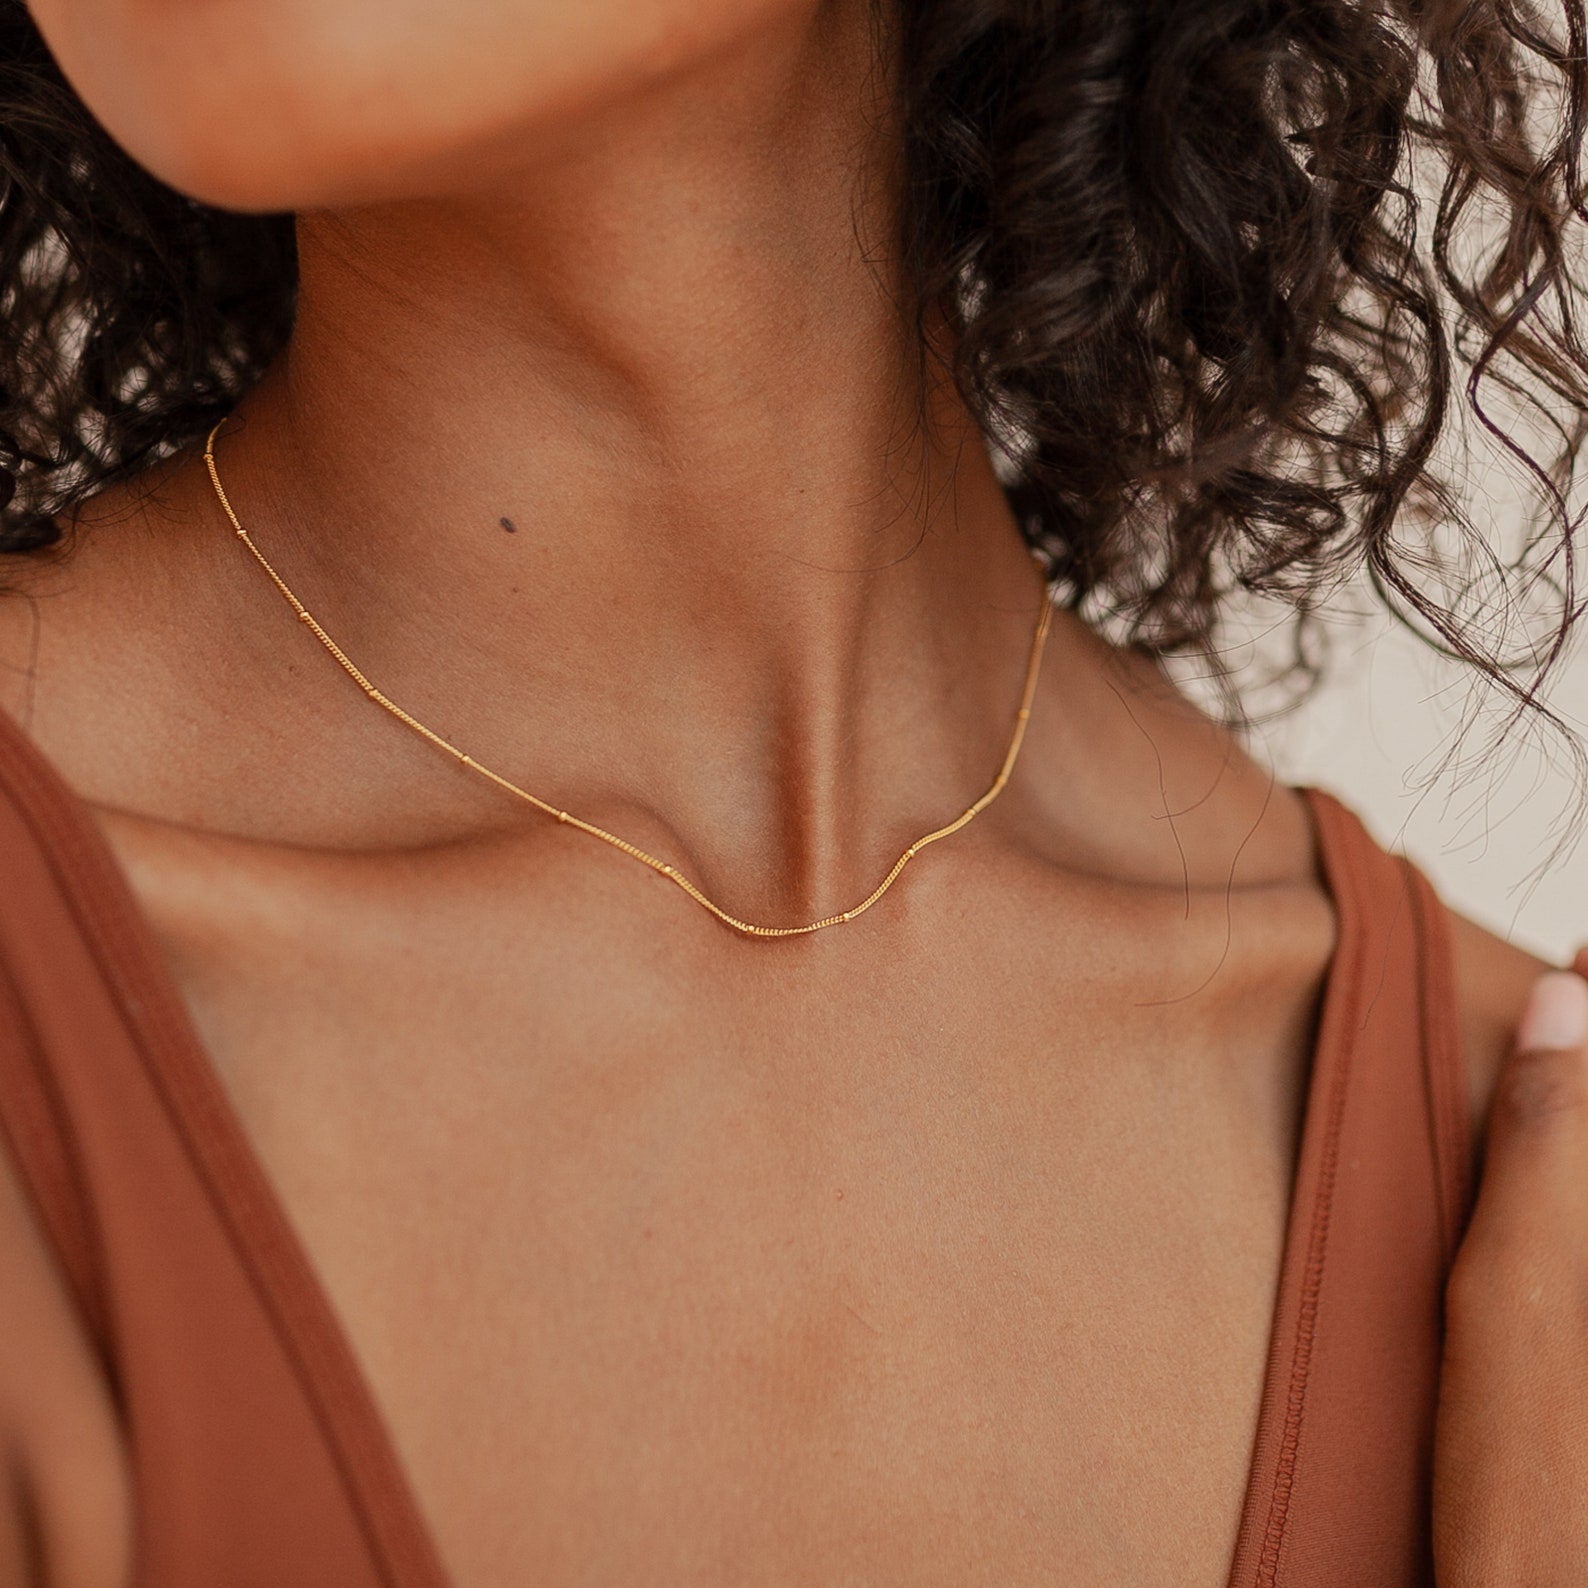 Dainty Necklace, Minimalist Necklace, Layering Necklace, Thin Chain Necklace,  Gift for Her, Gold Necklace, Silver Necklace, Choker Necklace - Etsy